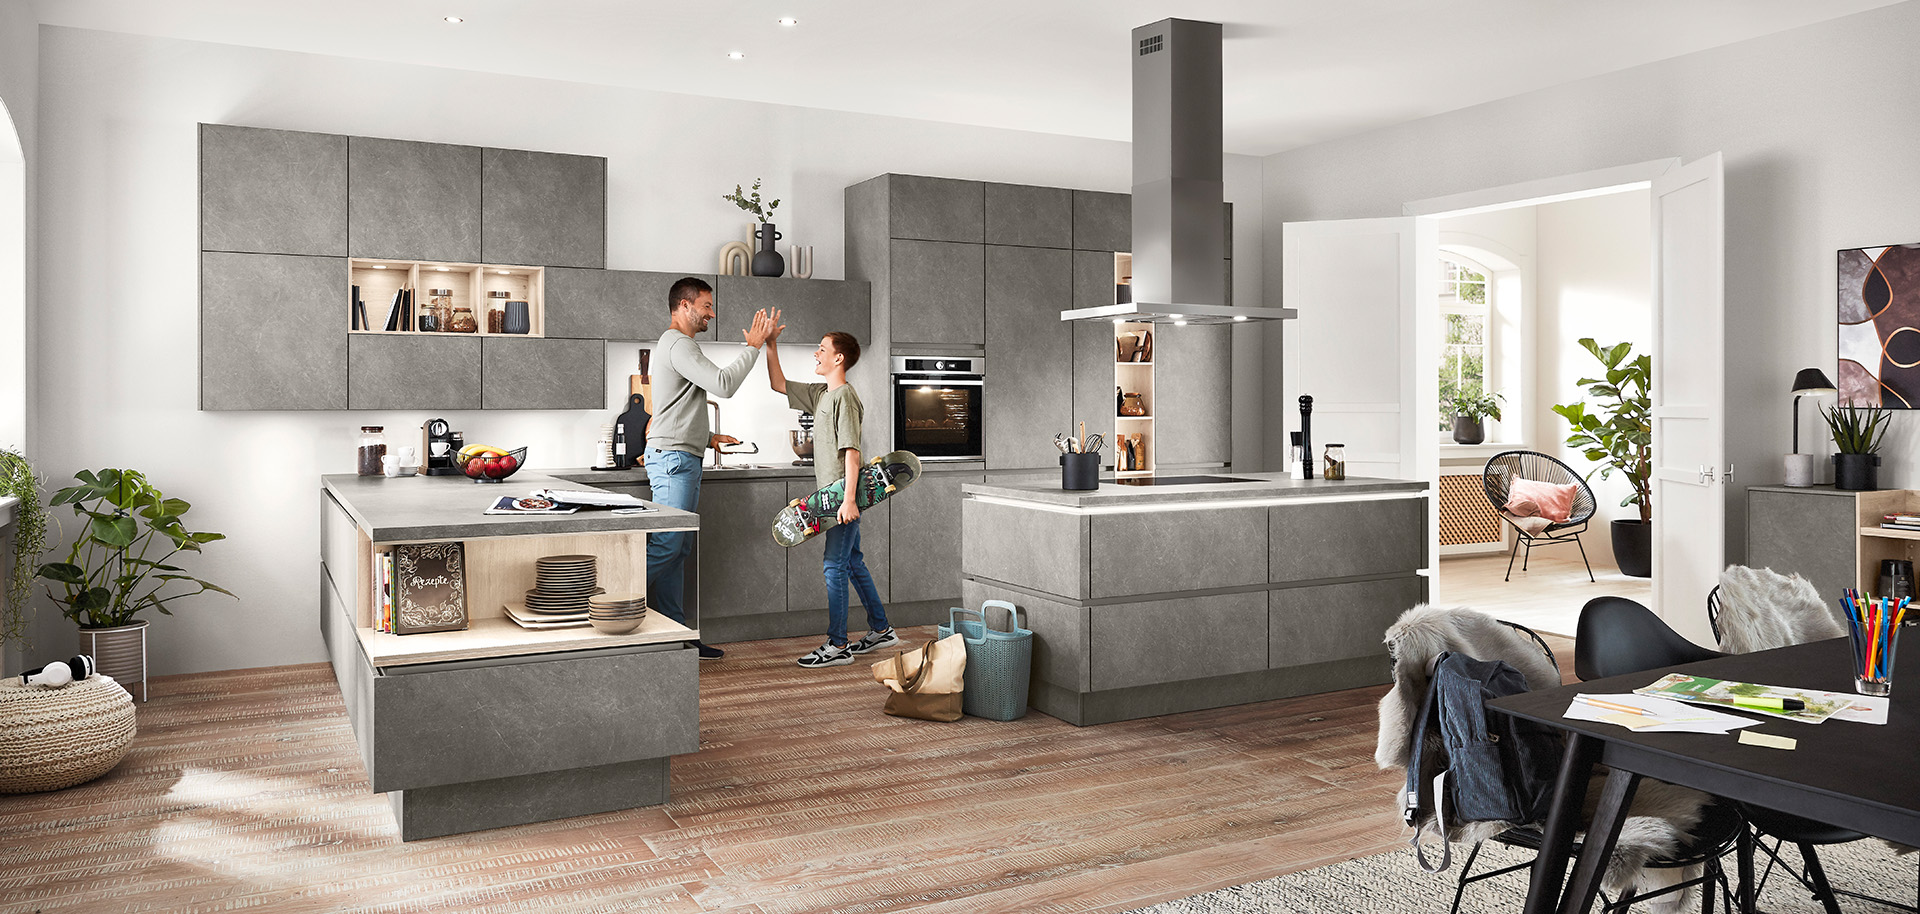 A modern, spacious kitchen with a couple engaged in a cheerful conversation, surrounded by sleek gray cabinetry, and elegant decor under natural lighting.